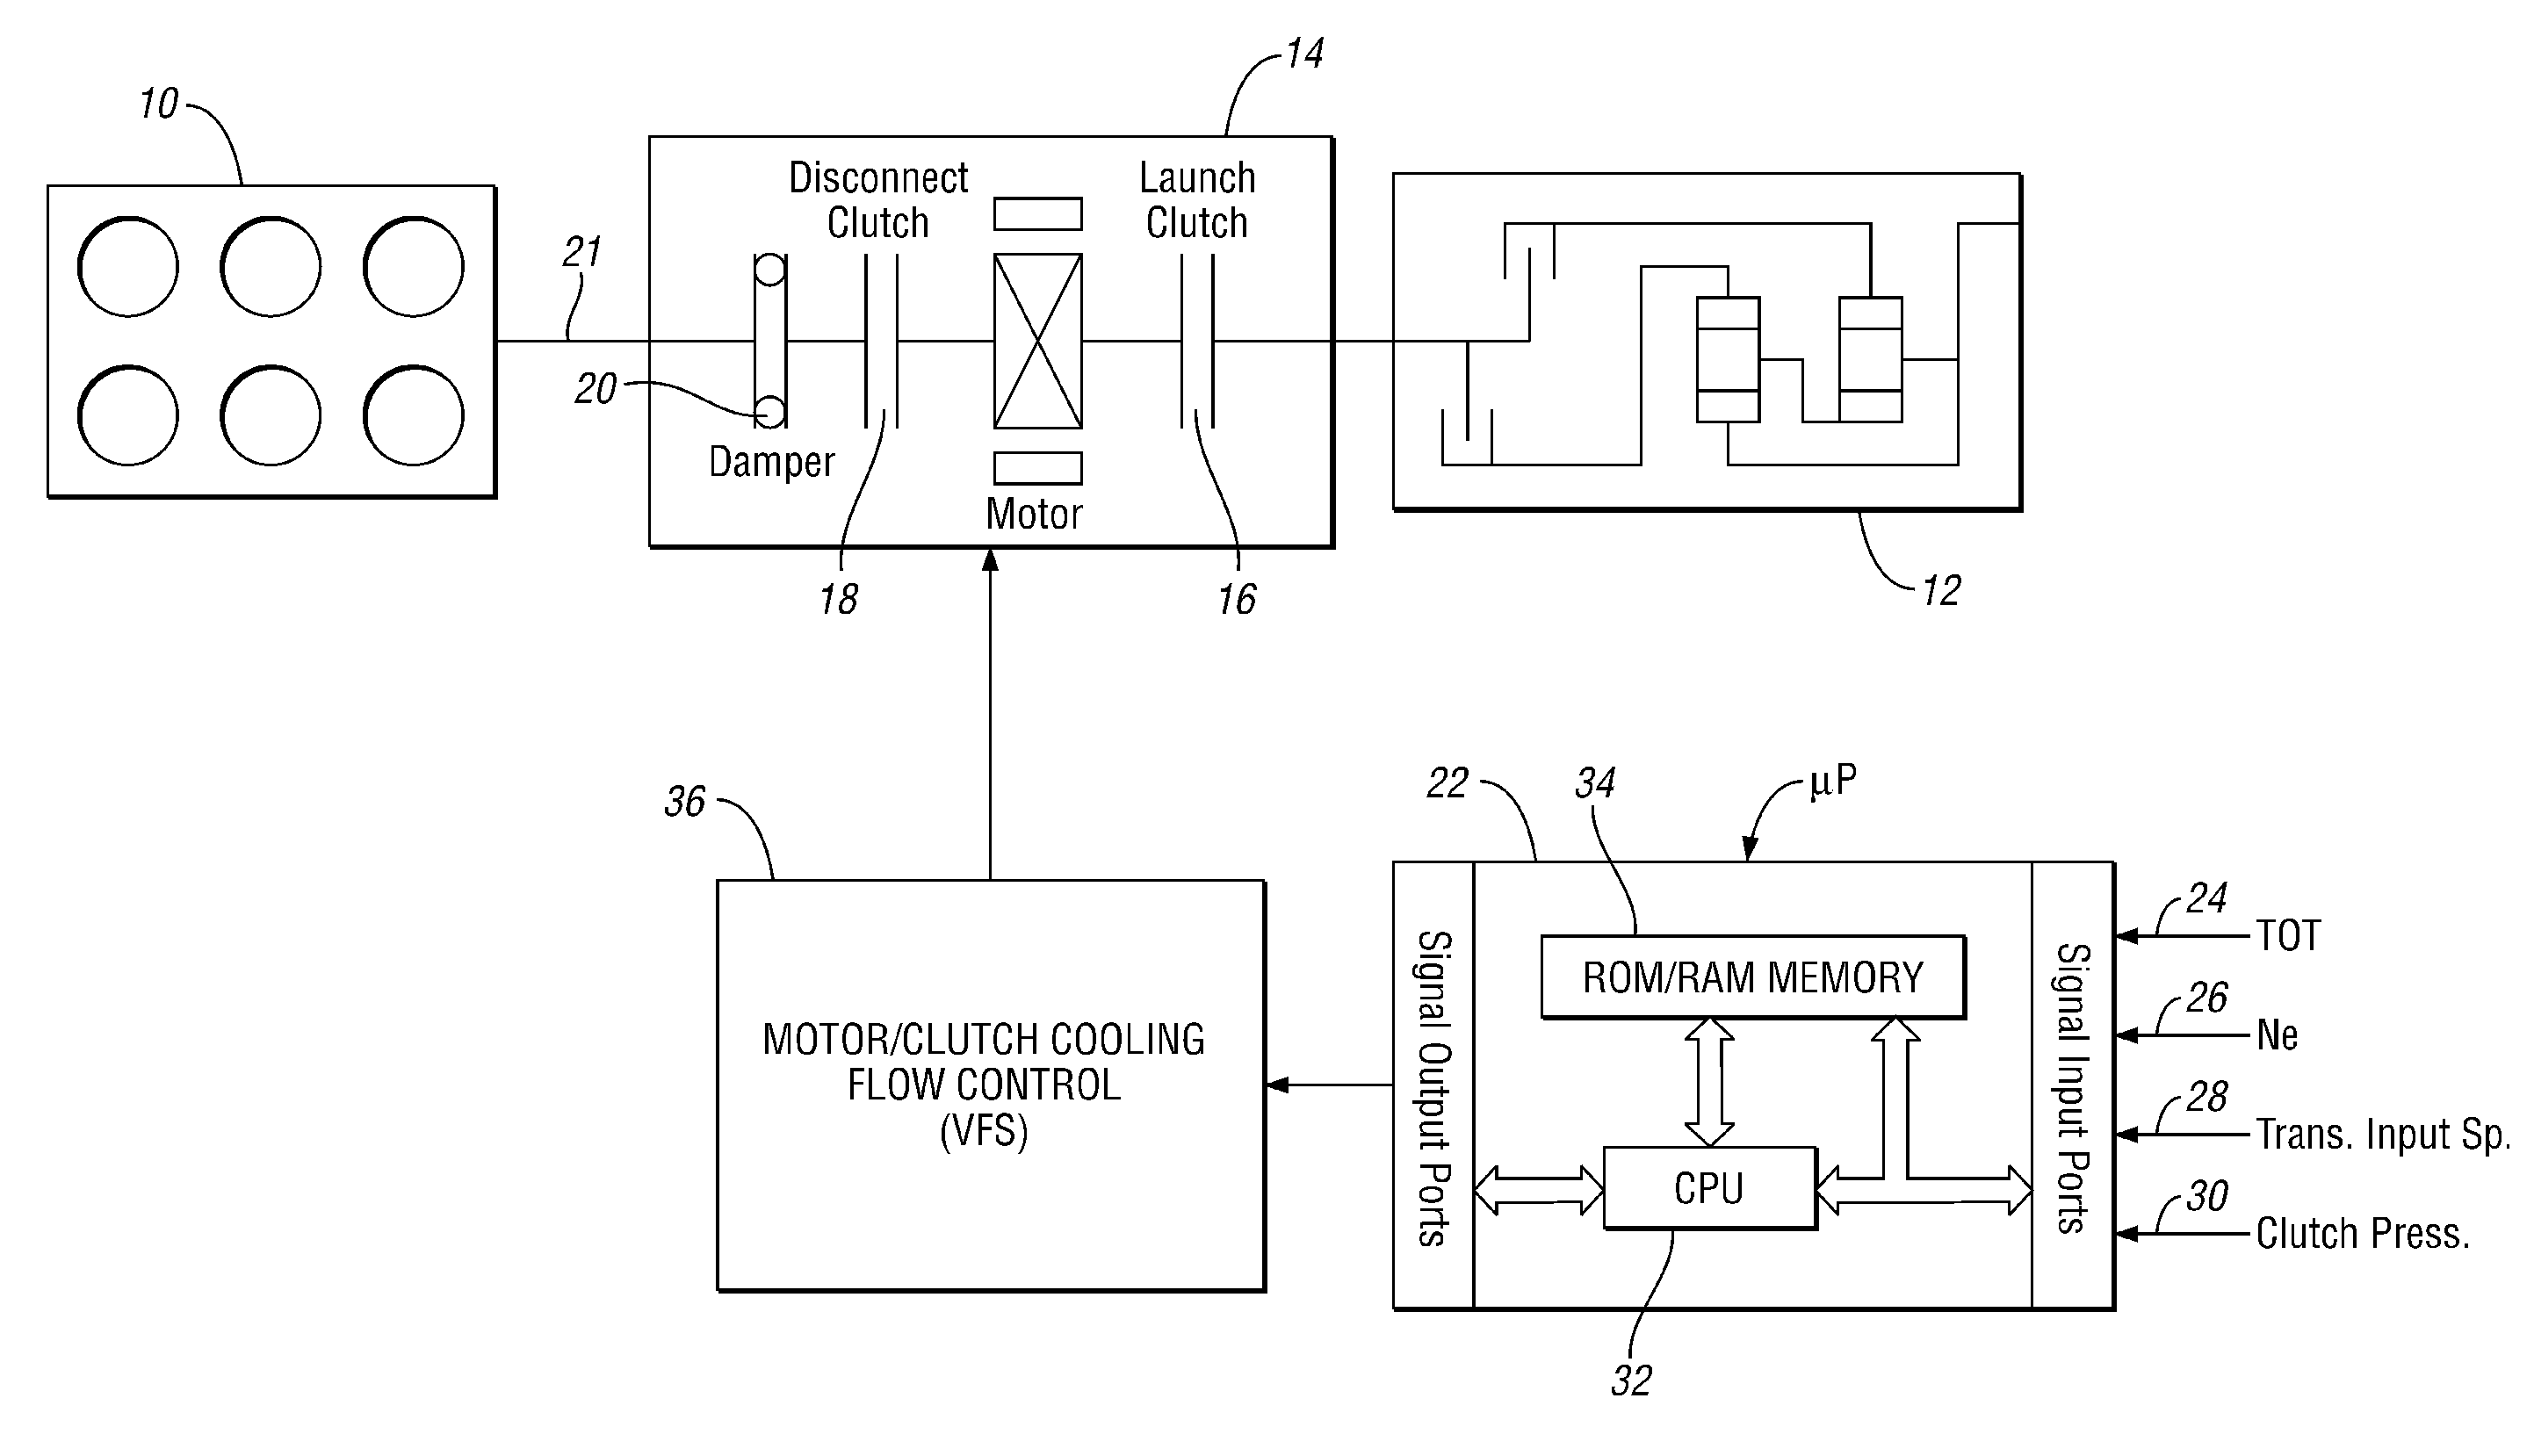 Control method for cooling a launch clutch and an electric motor in a hybrid electric vehicle powertrain